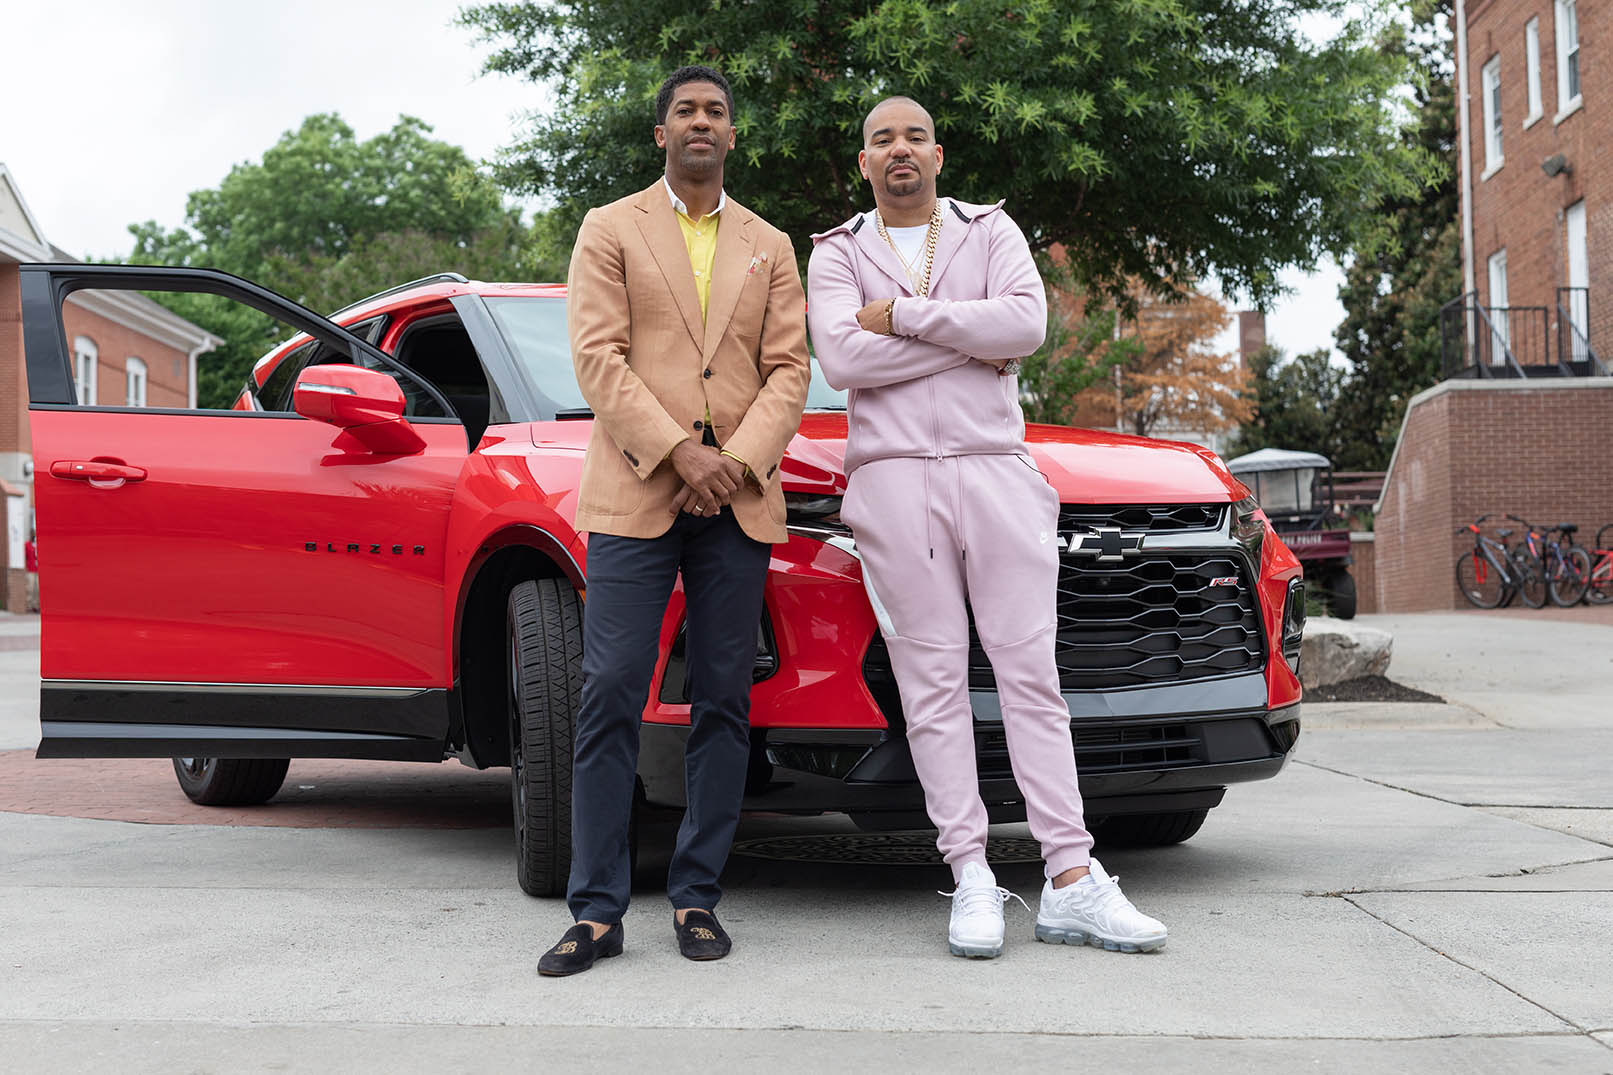 (pictured left to right) The 2019 Chevrolet Discover the Unexpected Advisor Fonzworth Bentley and Ambassador DJ Envy with the all-new 2019 Chevrolet Blazer. During this 8-week program, these two gentlemen will serve as resources and mentors to the six HBCU students who were selected from a dynamic pool of applicants.